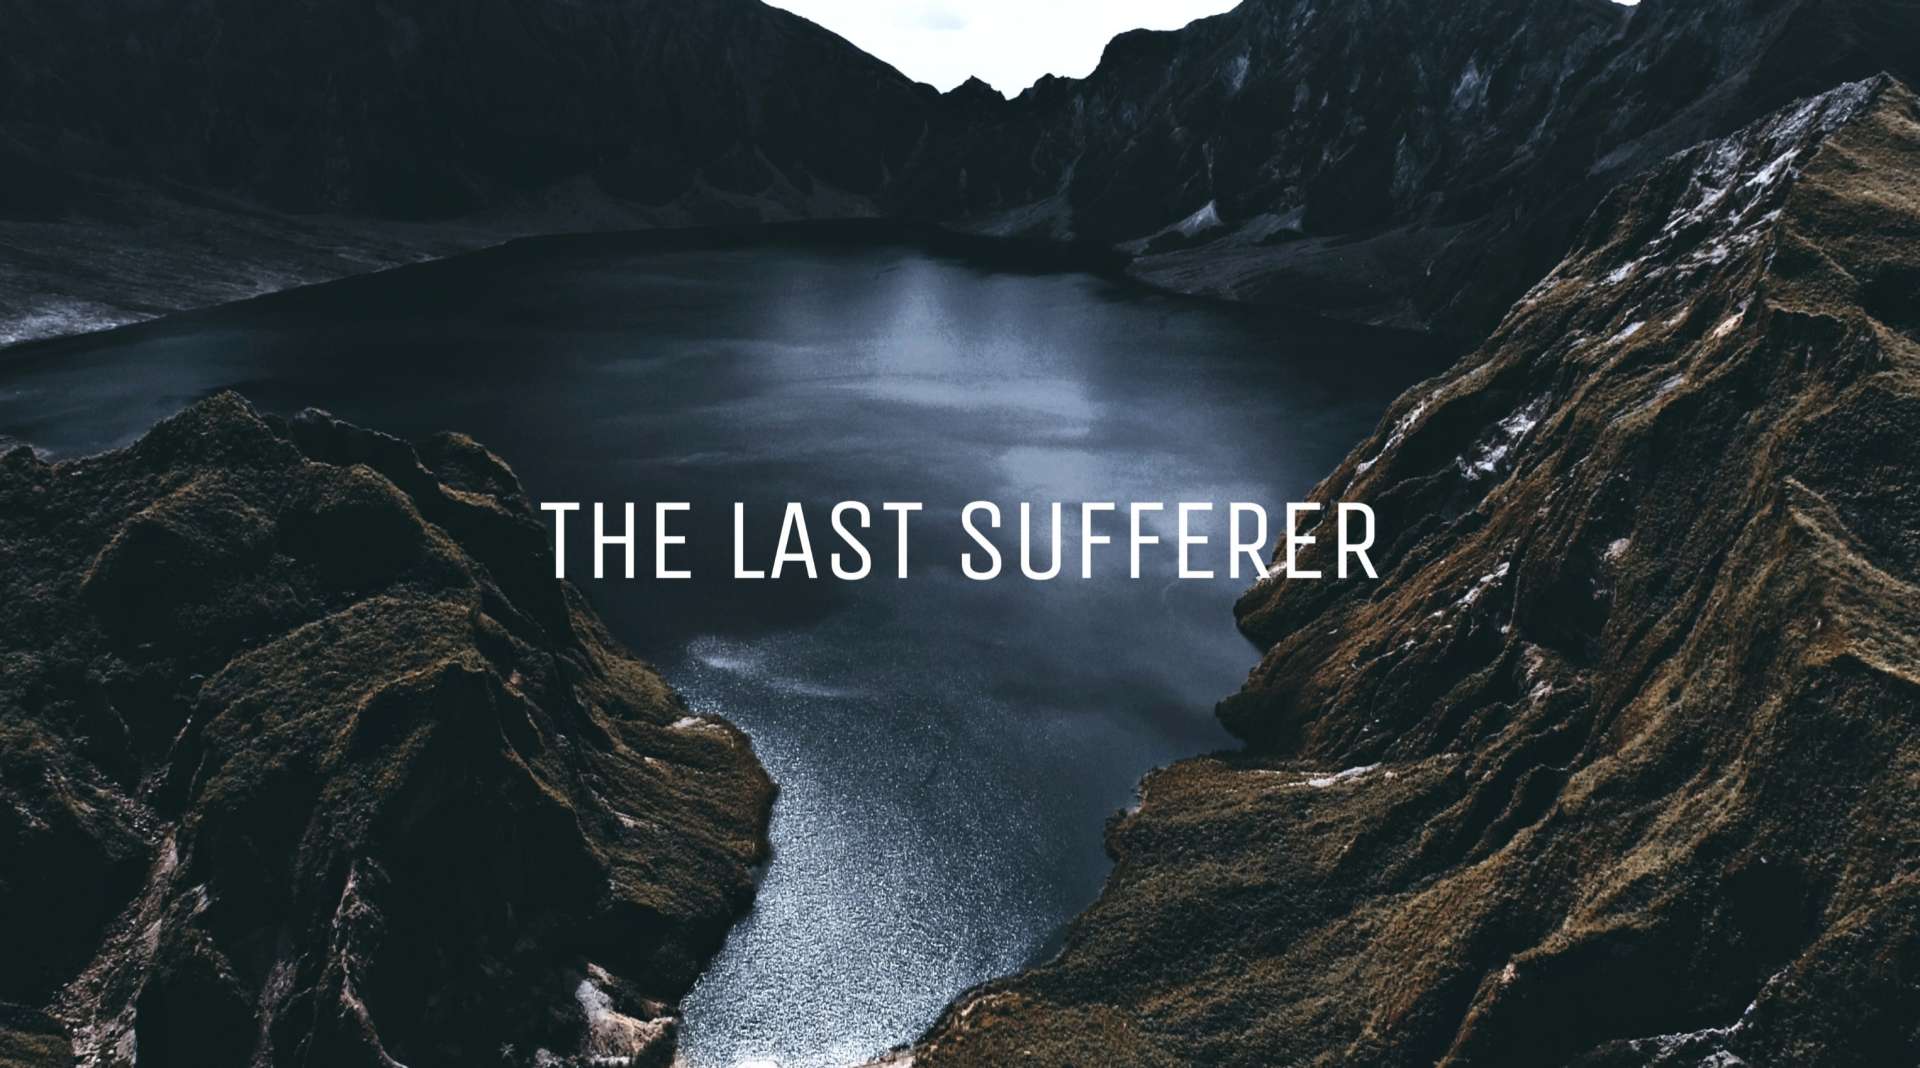 YOUNG | THE LAST SUFFERER 最后一位苦难者